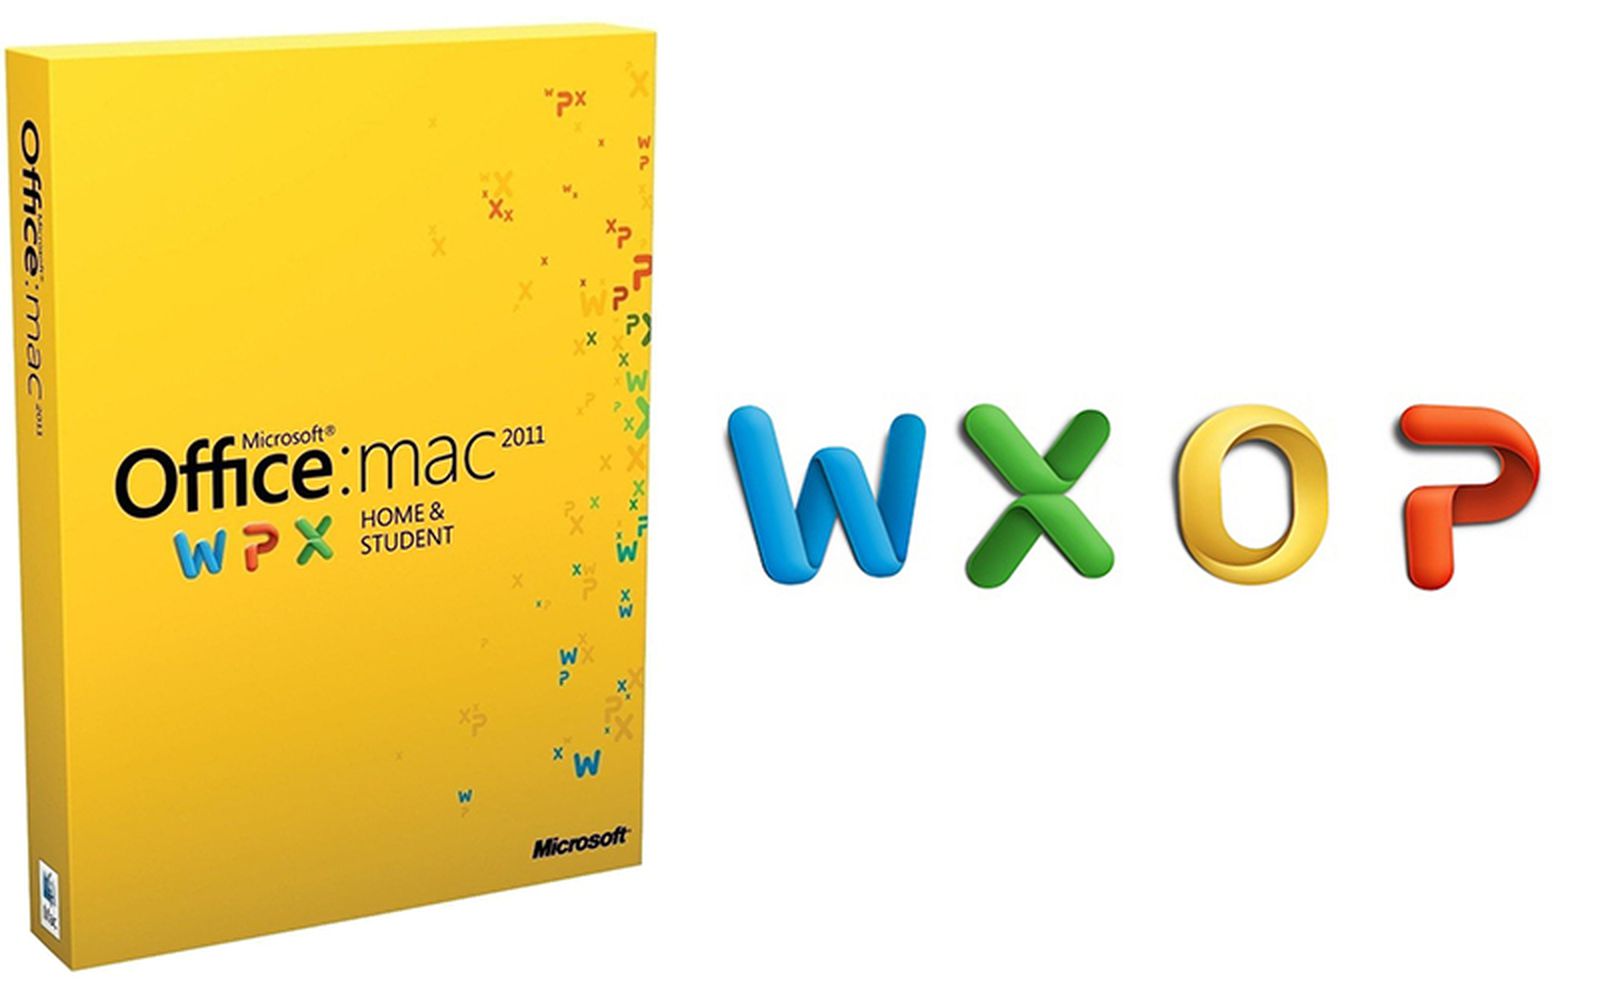 does microsoft support office 2011 for mac